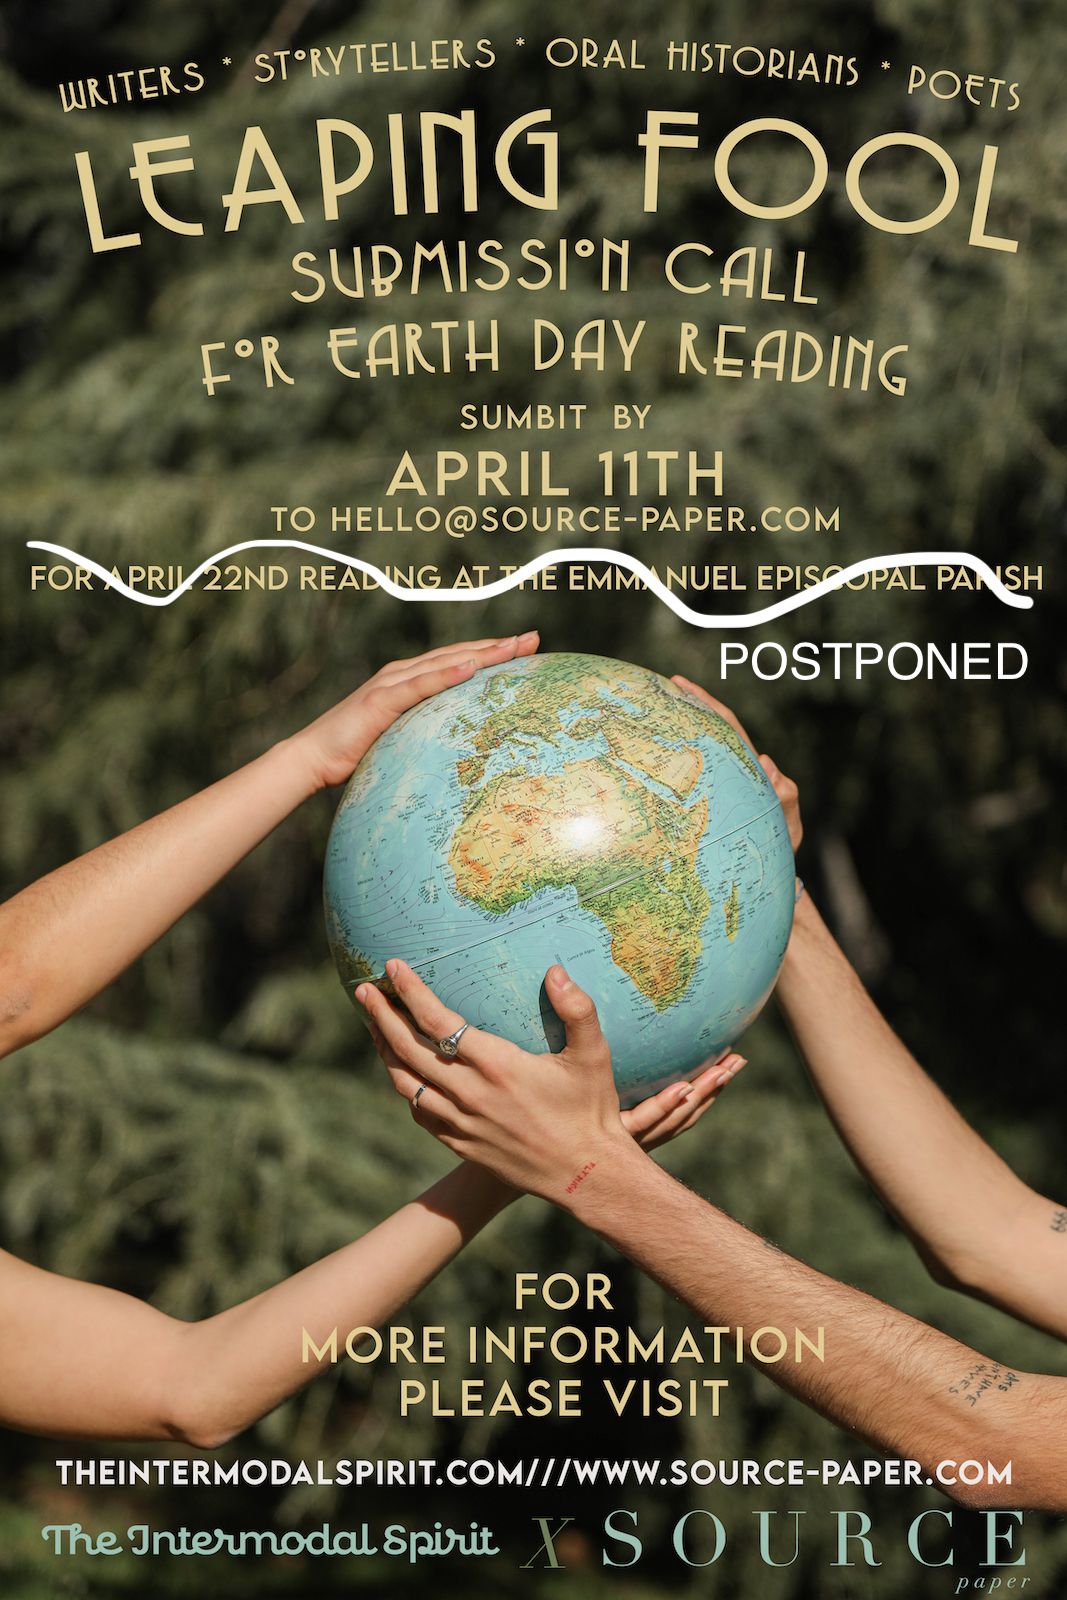 Earth Day Leaping Fool Postponed (Public)